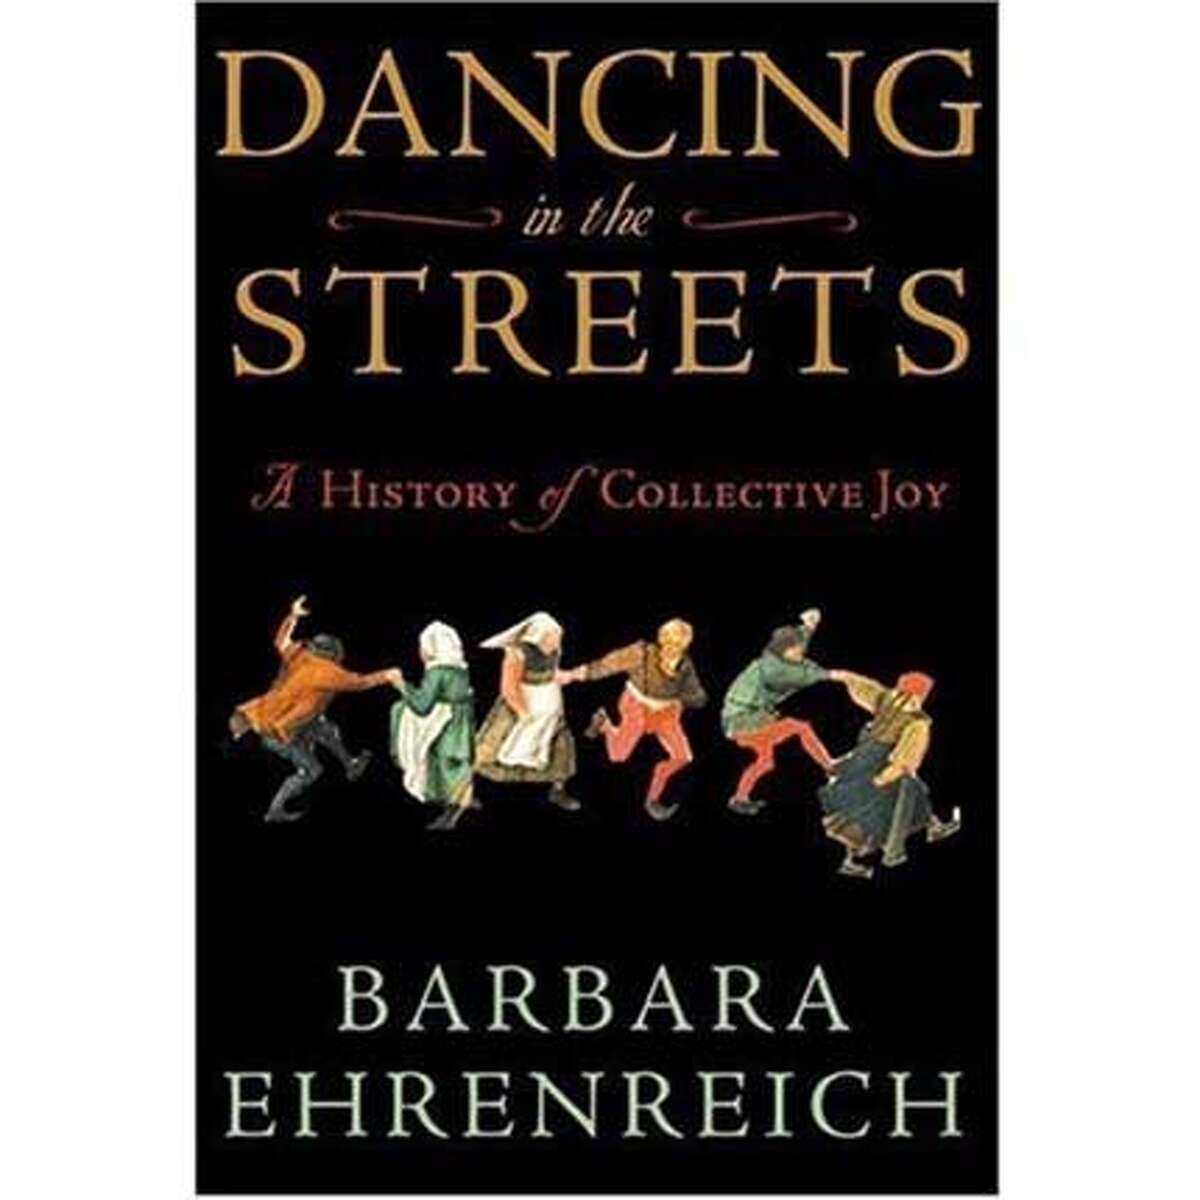 "Dancing in the Streets: A History of Collective Joy" by Barbara Ehrenreich